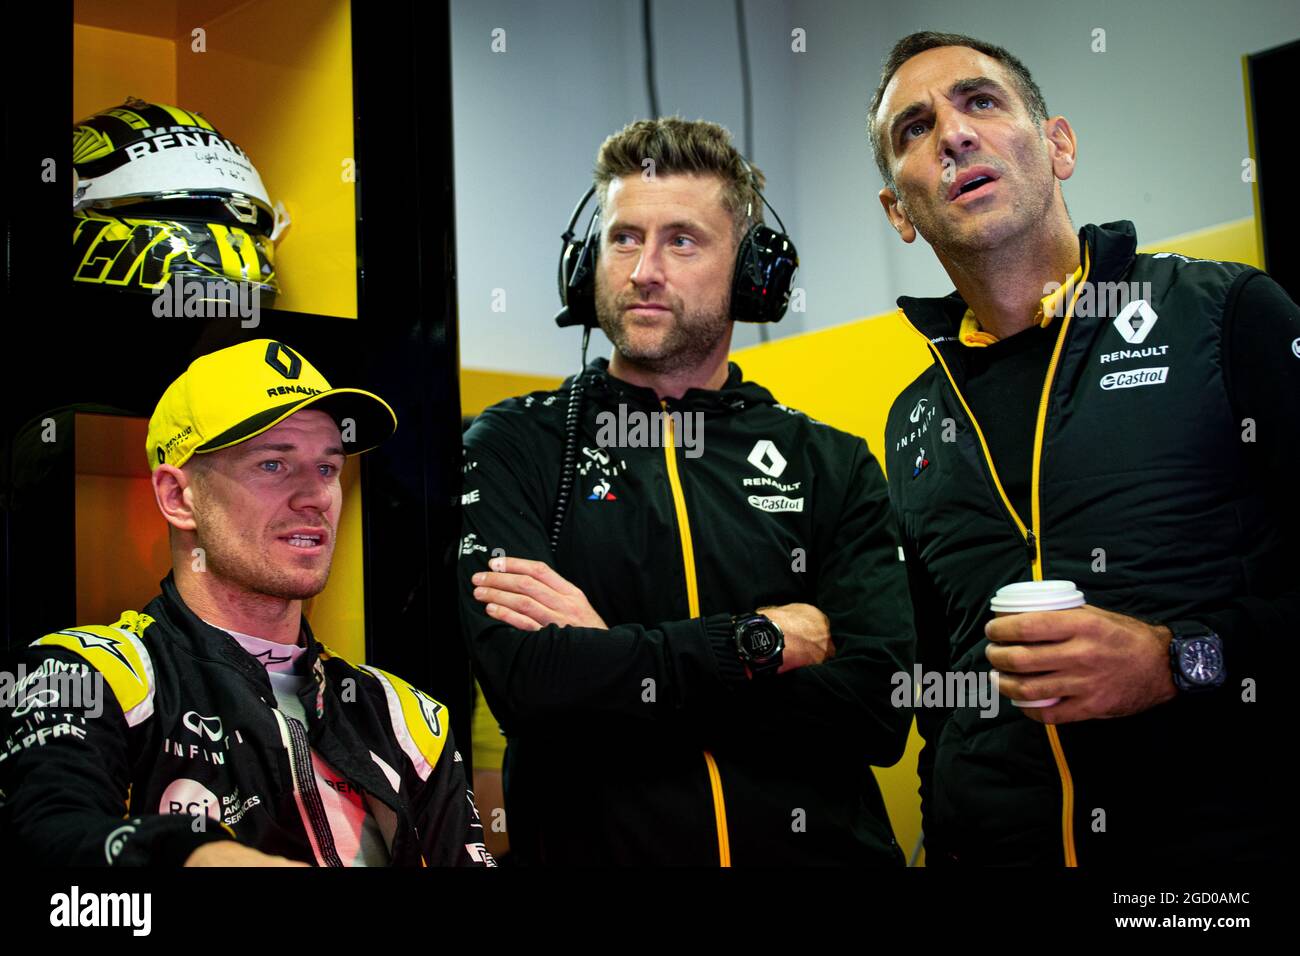 L to R): Nico Hulkenberg (GER) Renault F1 Team with Martin Poole (GBR)  Renault F1 Team Personal Trainer and Cyril Abiteboul (FRA) Renault Sport F1  Managing Director. Italian Grand Prix, Friday 6th